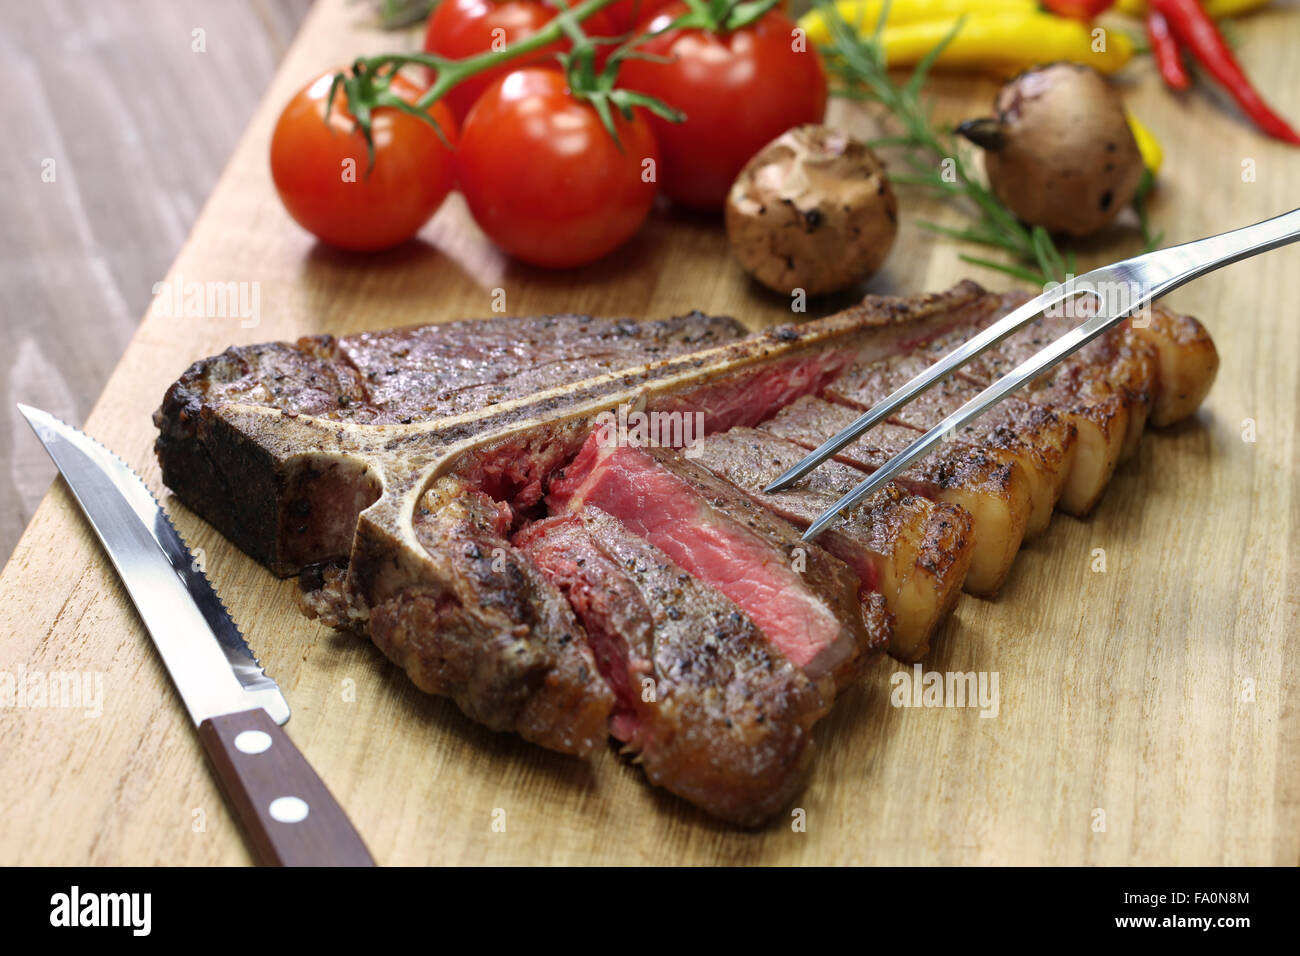 Bistecca Fiorentina High Resolution Stock Photography and Images - Alamy